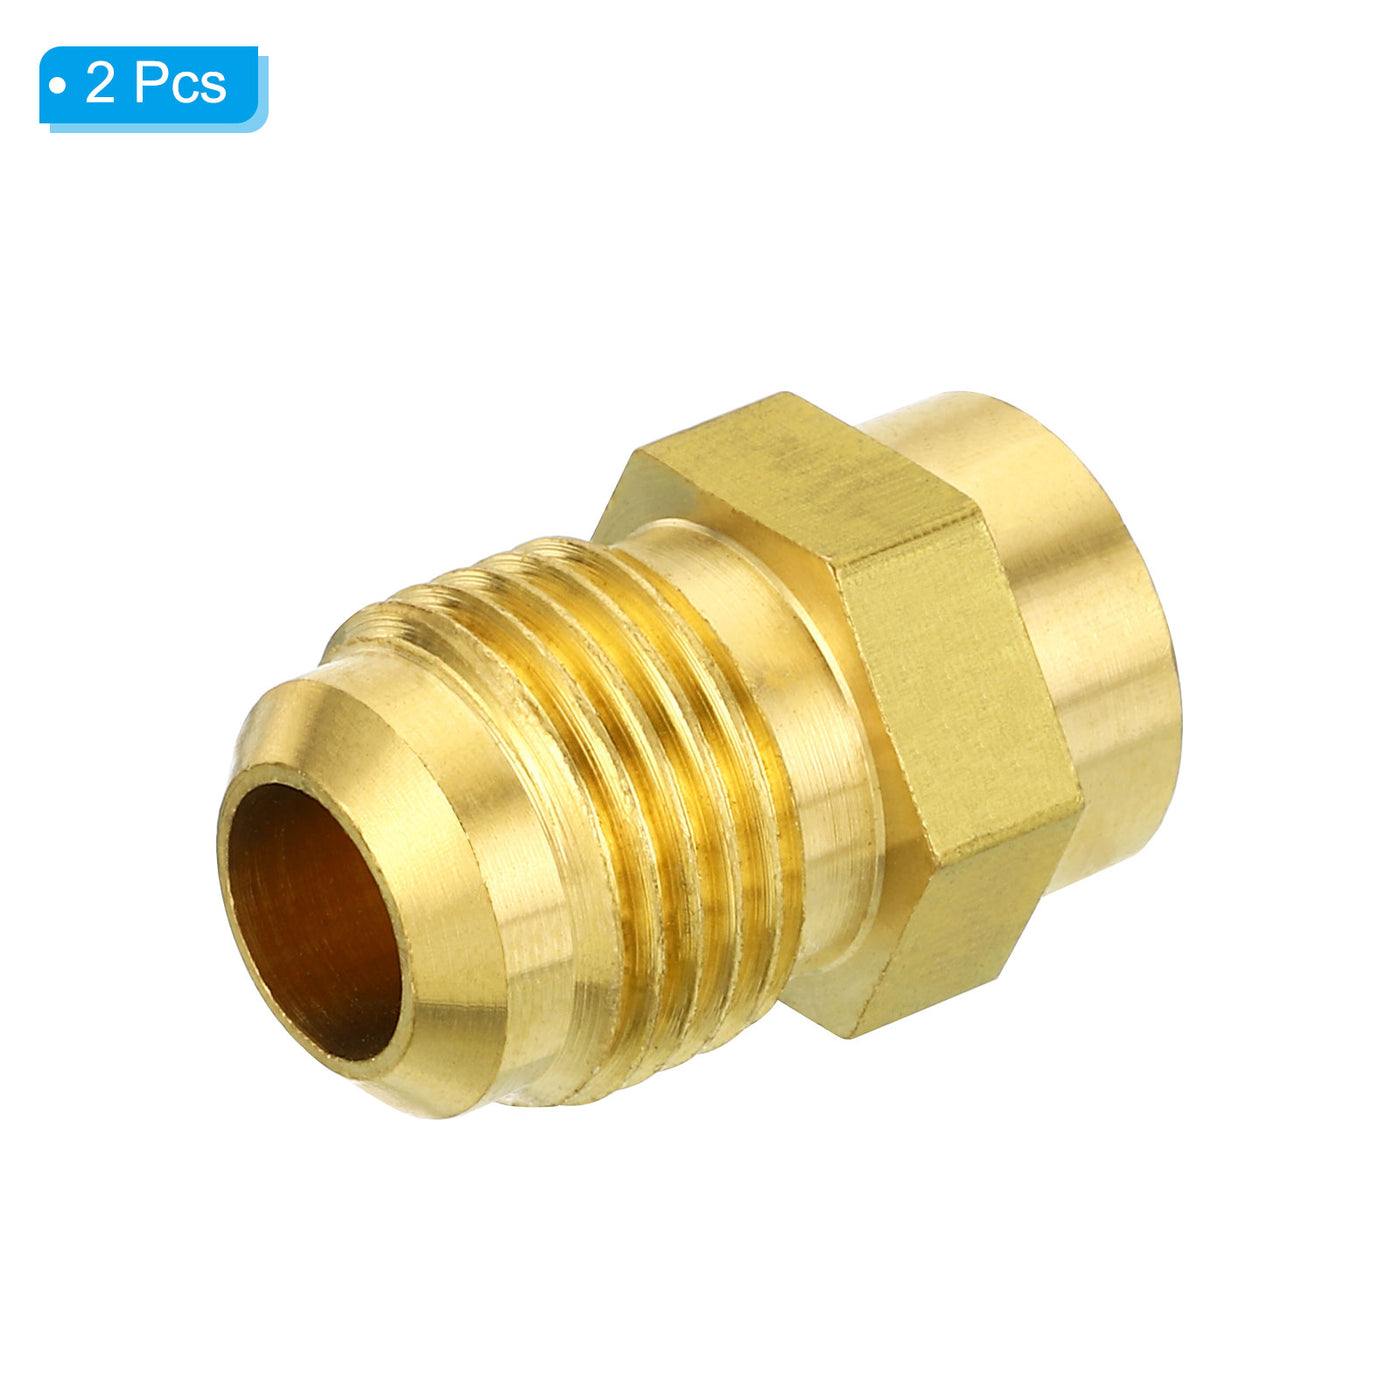 Harfington 3/8 SAE Male Thread Brass Flare Tube Fitting, 2 Pack Pipe Adapter Connector for Plumbing HVAC Air Conditioner